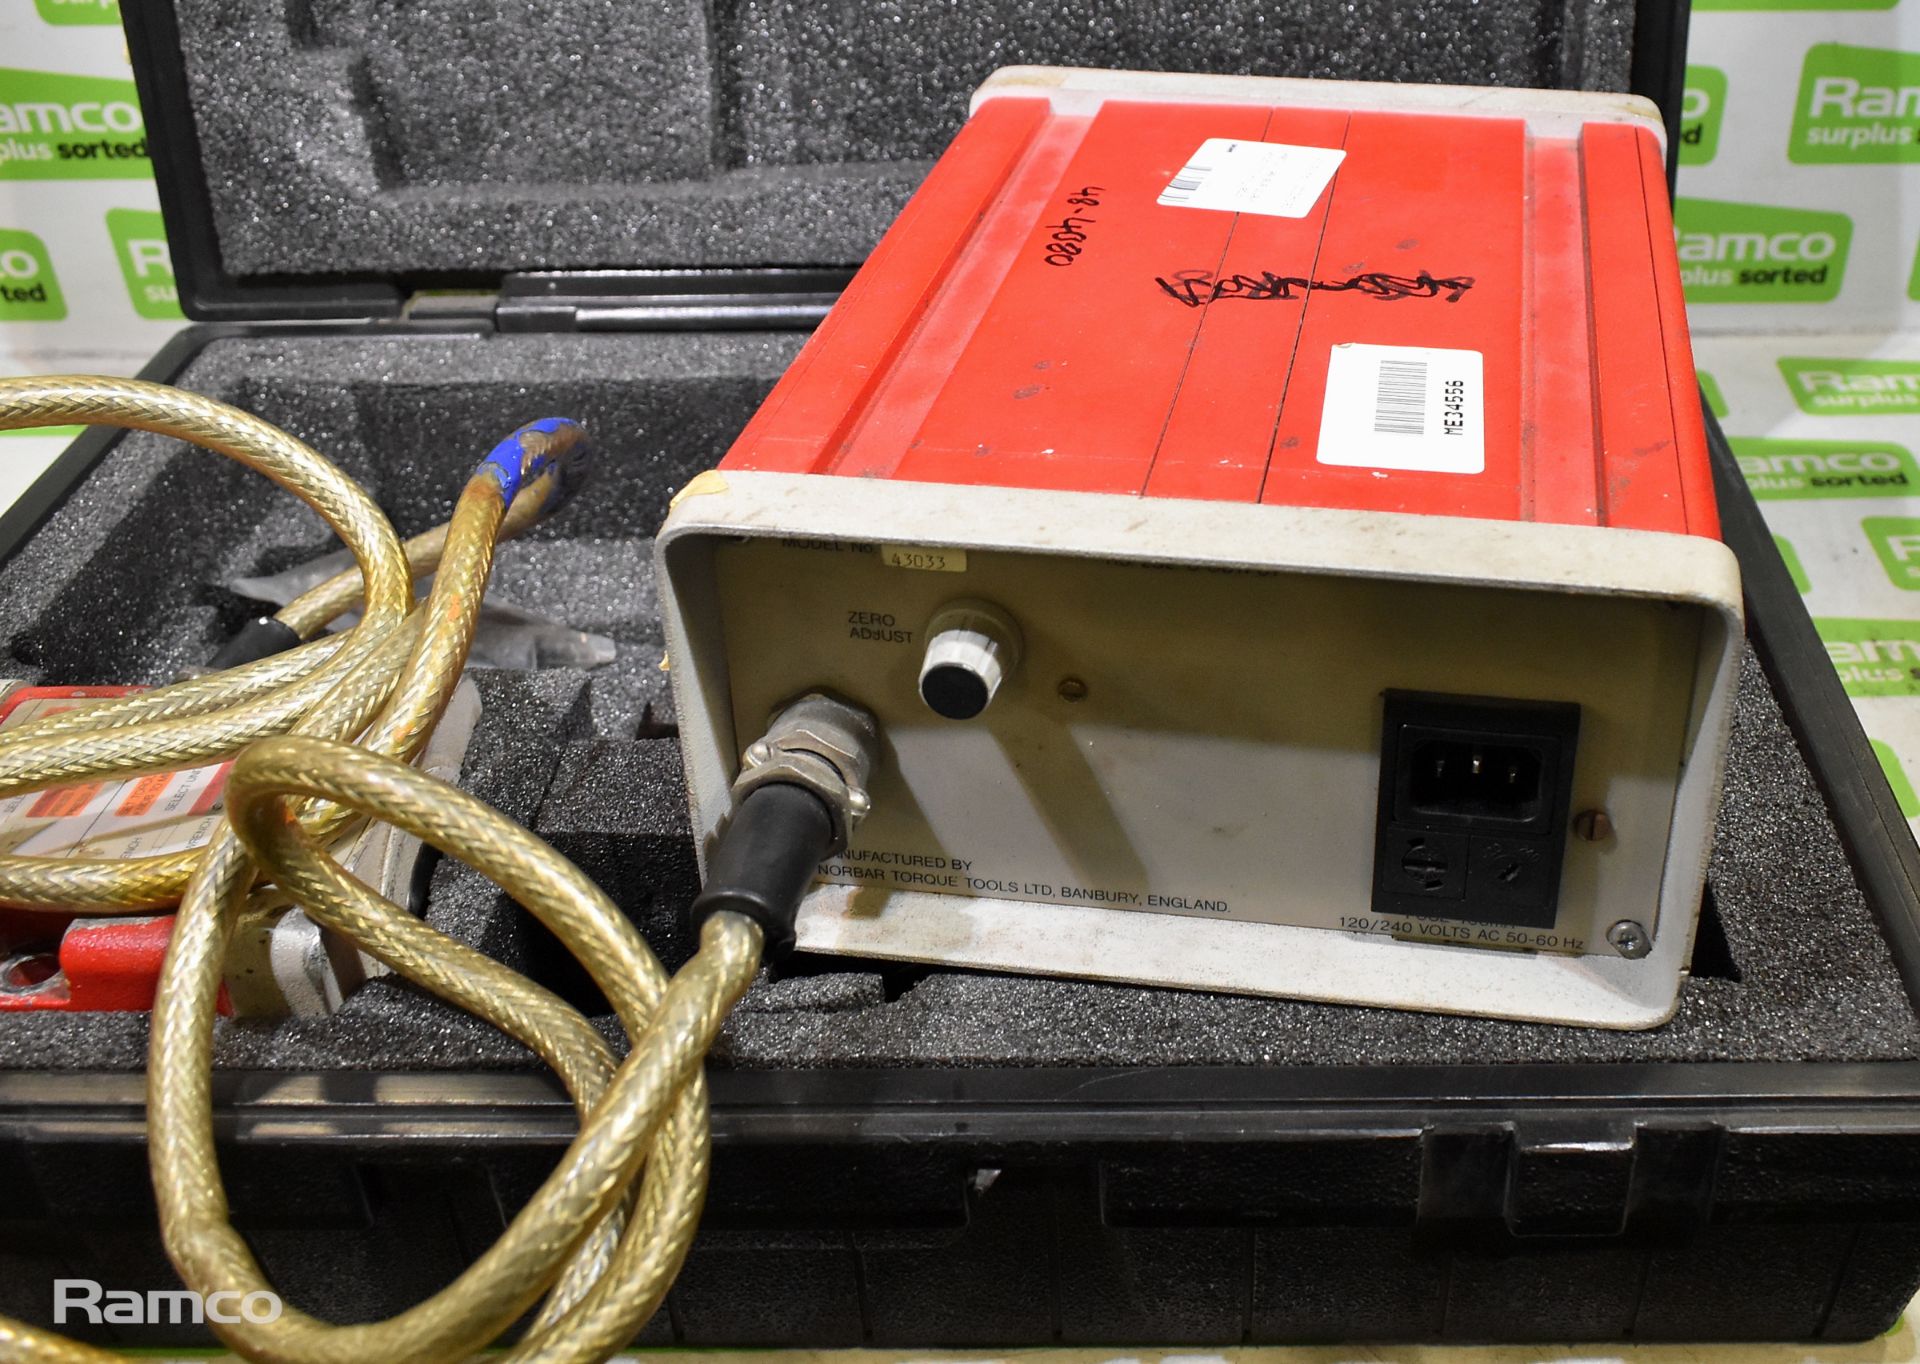 Norbar TWA 1000 torque wrench analyser - in case - Image 4 of 7